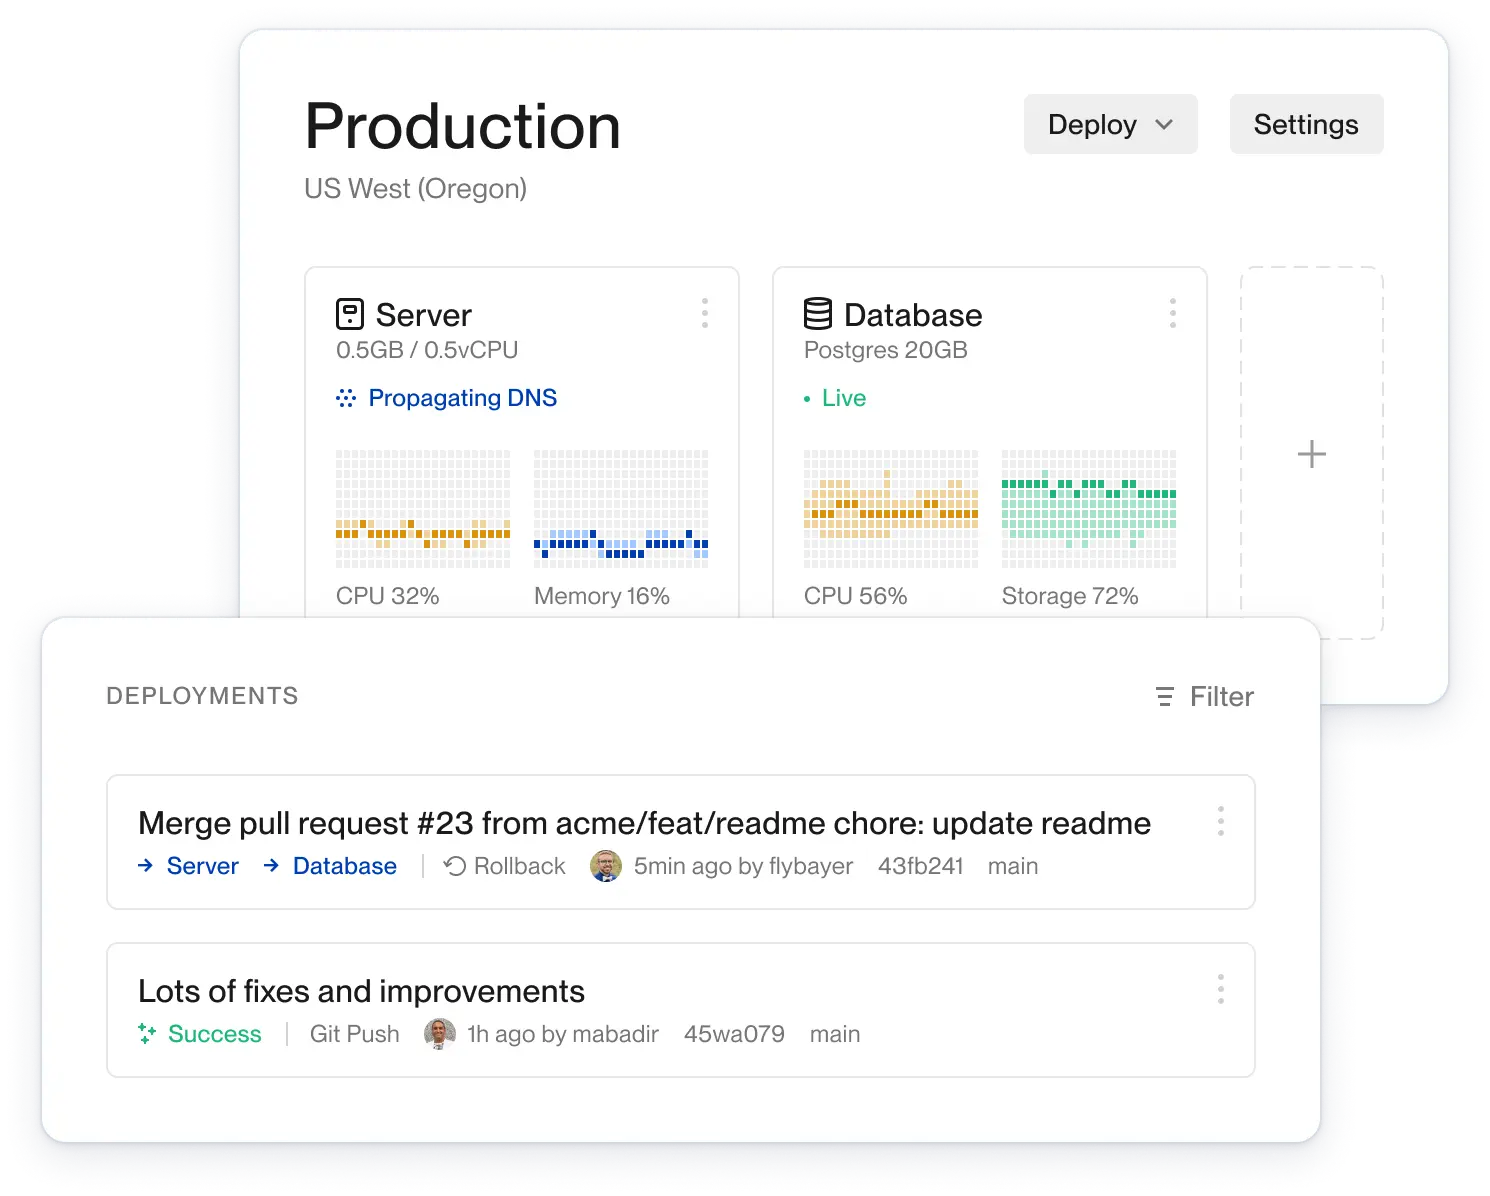 See service metrics and deployments